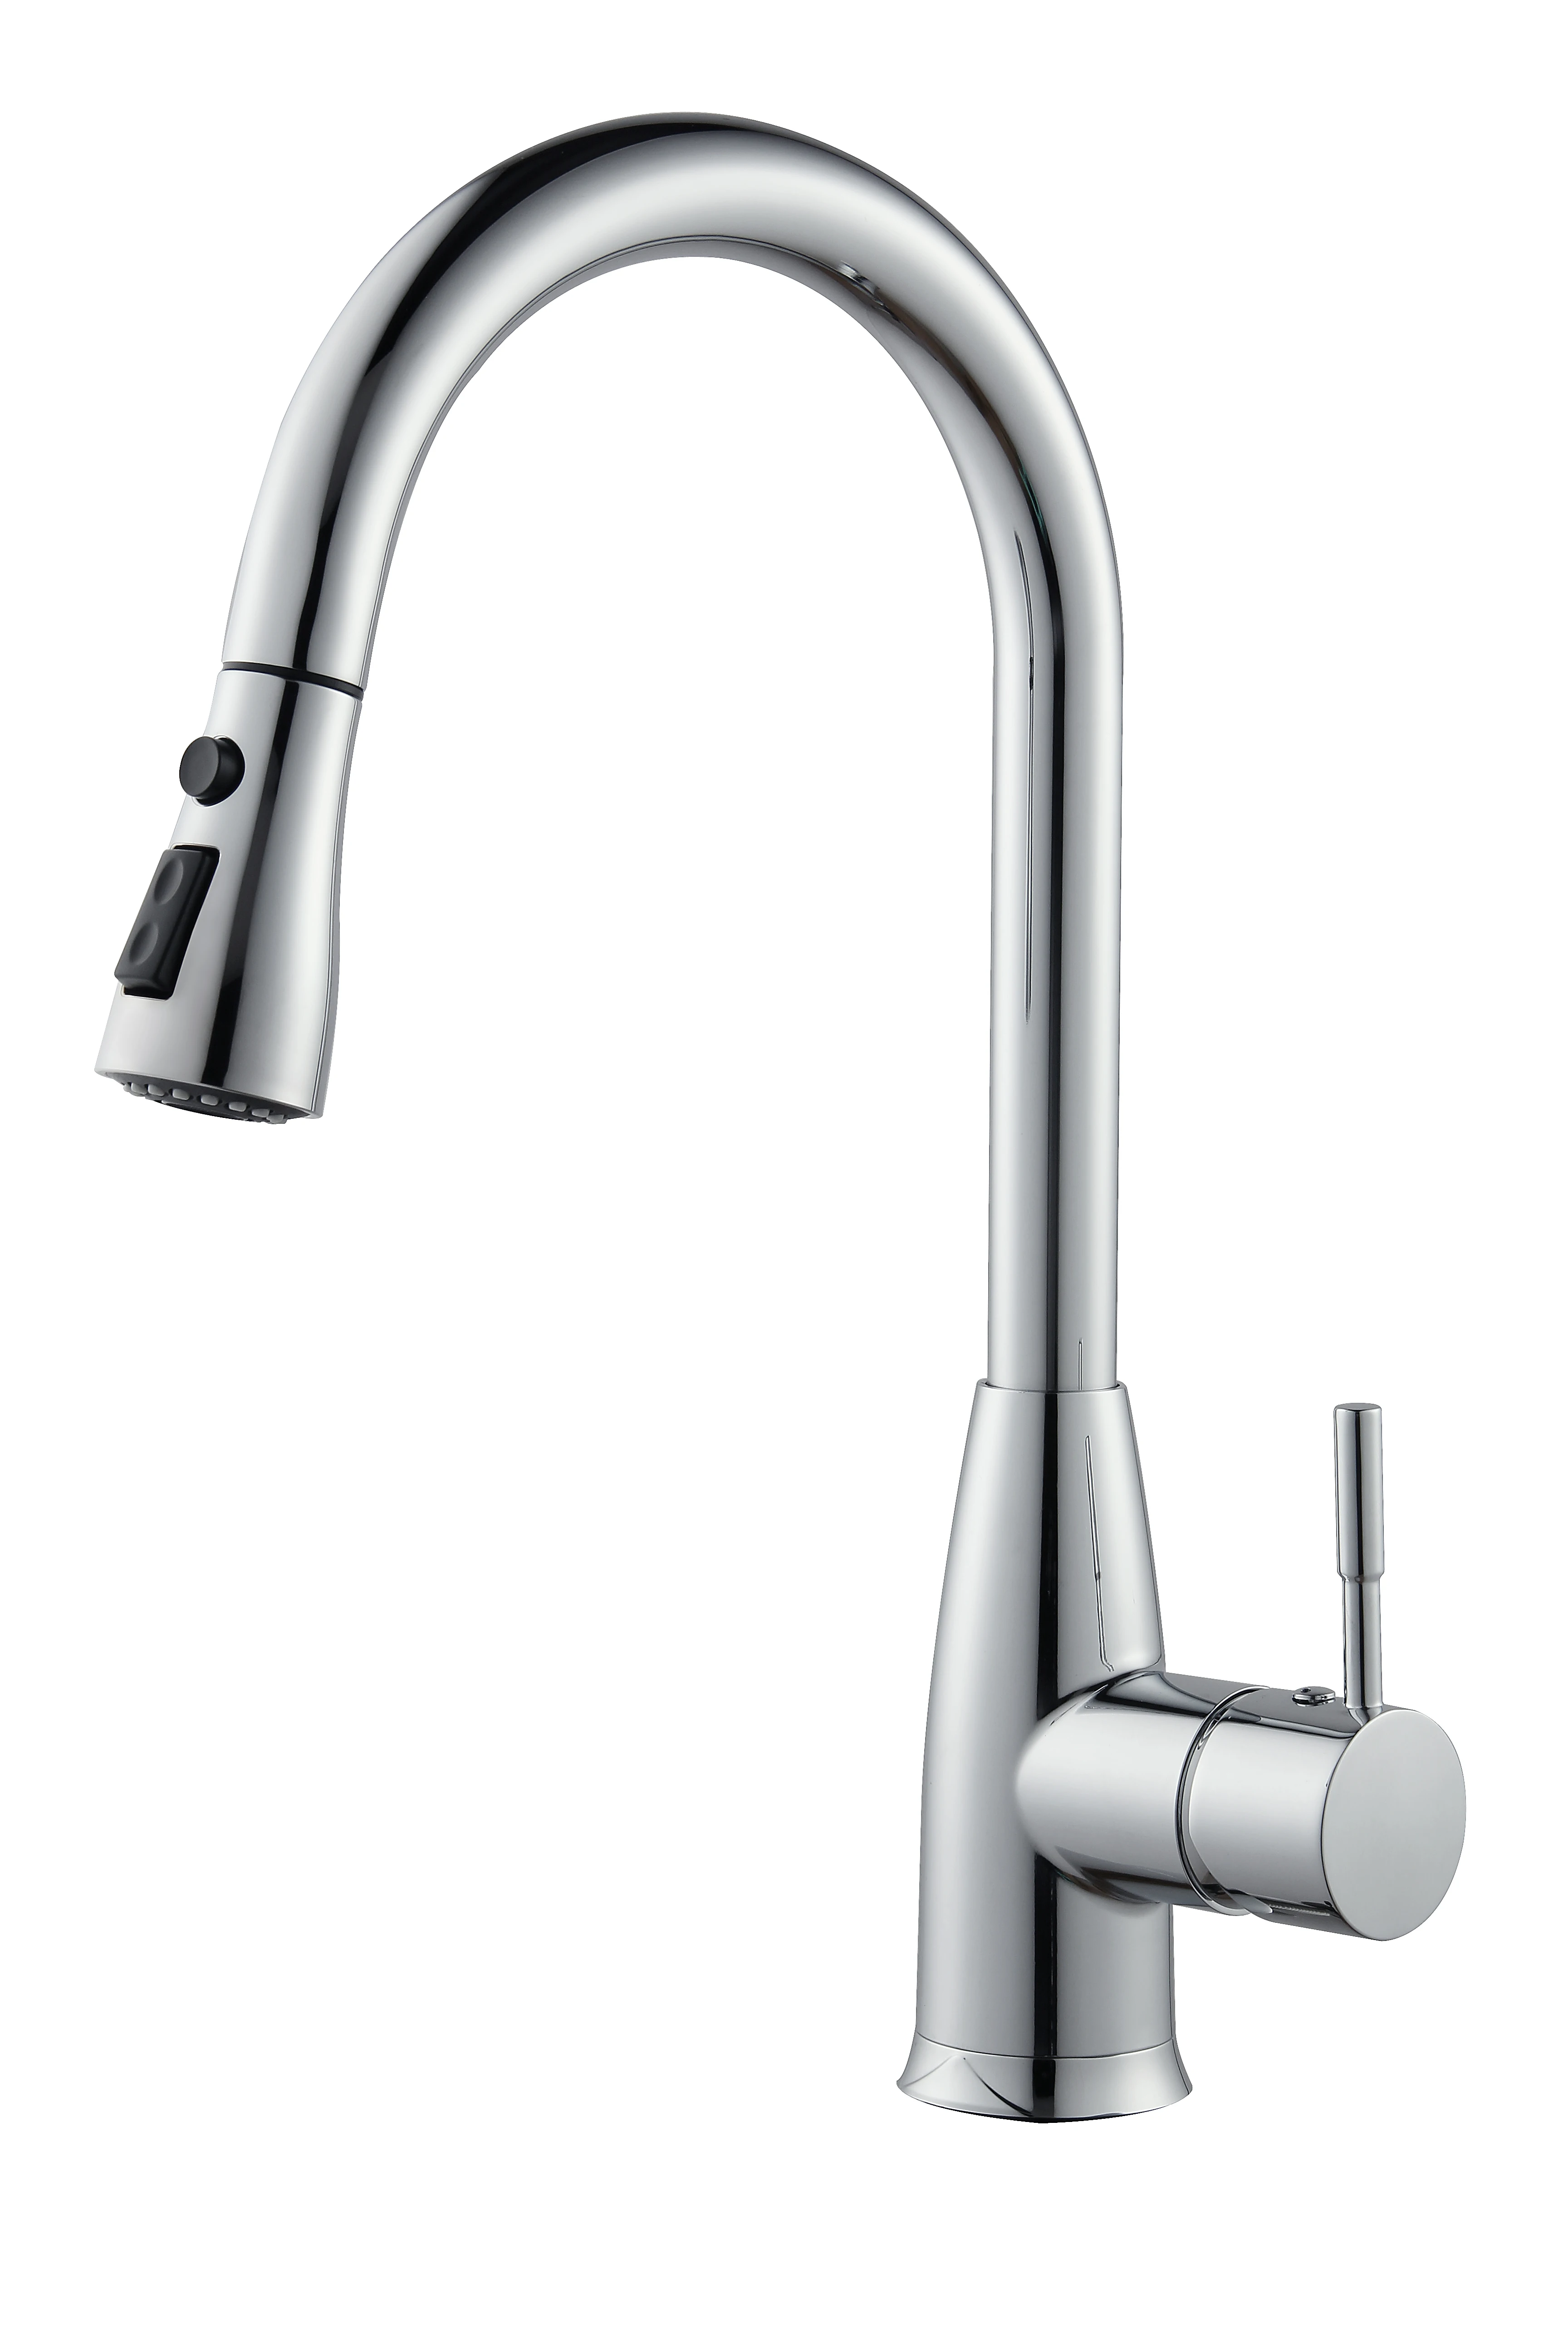 Single-Handle Kitchen Pull-Down Faucet with Magnetic Docking Spray Head, Chrome